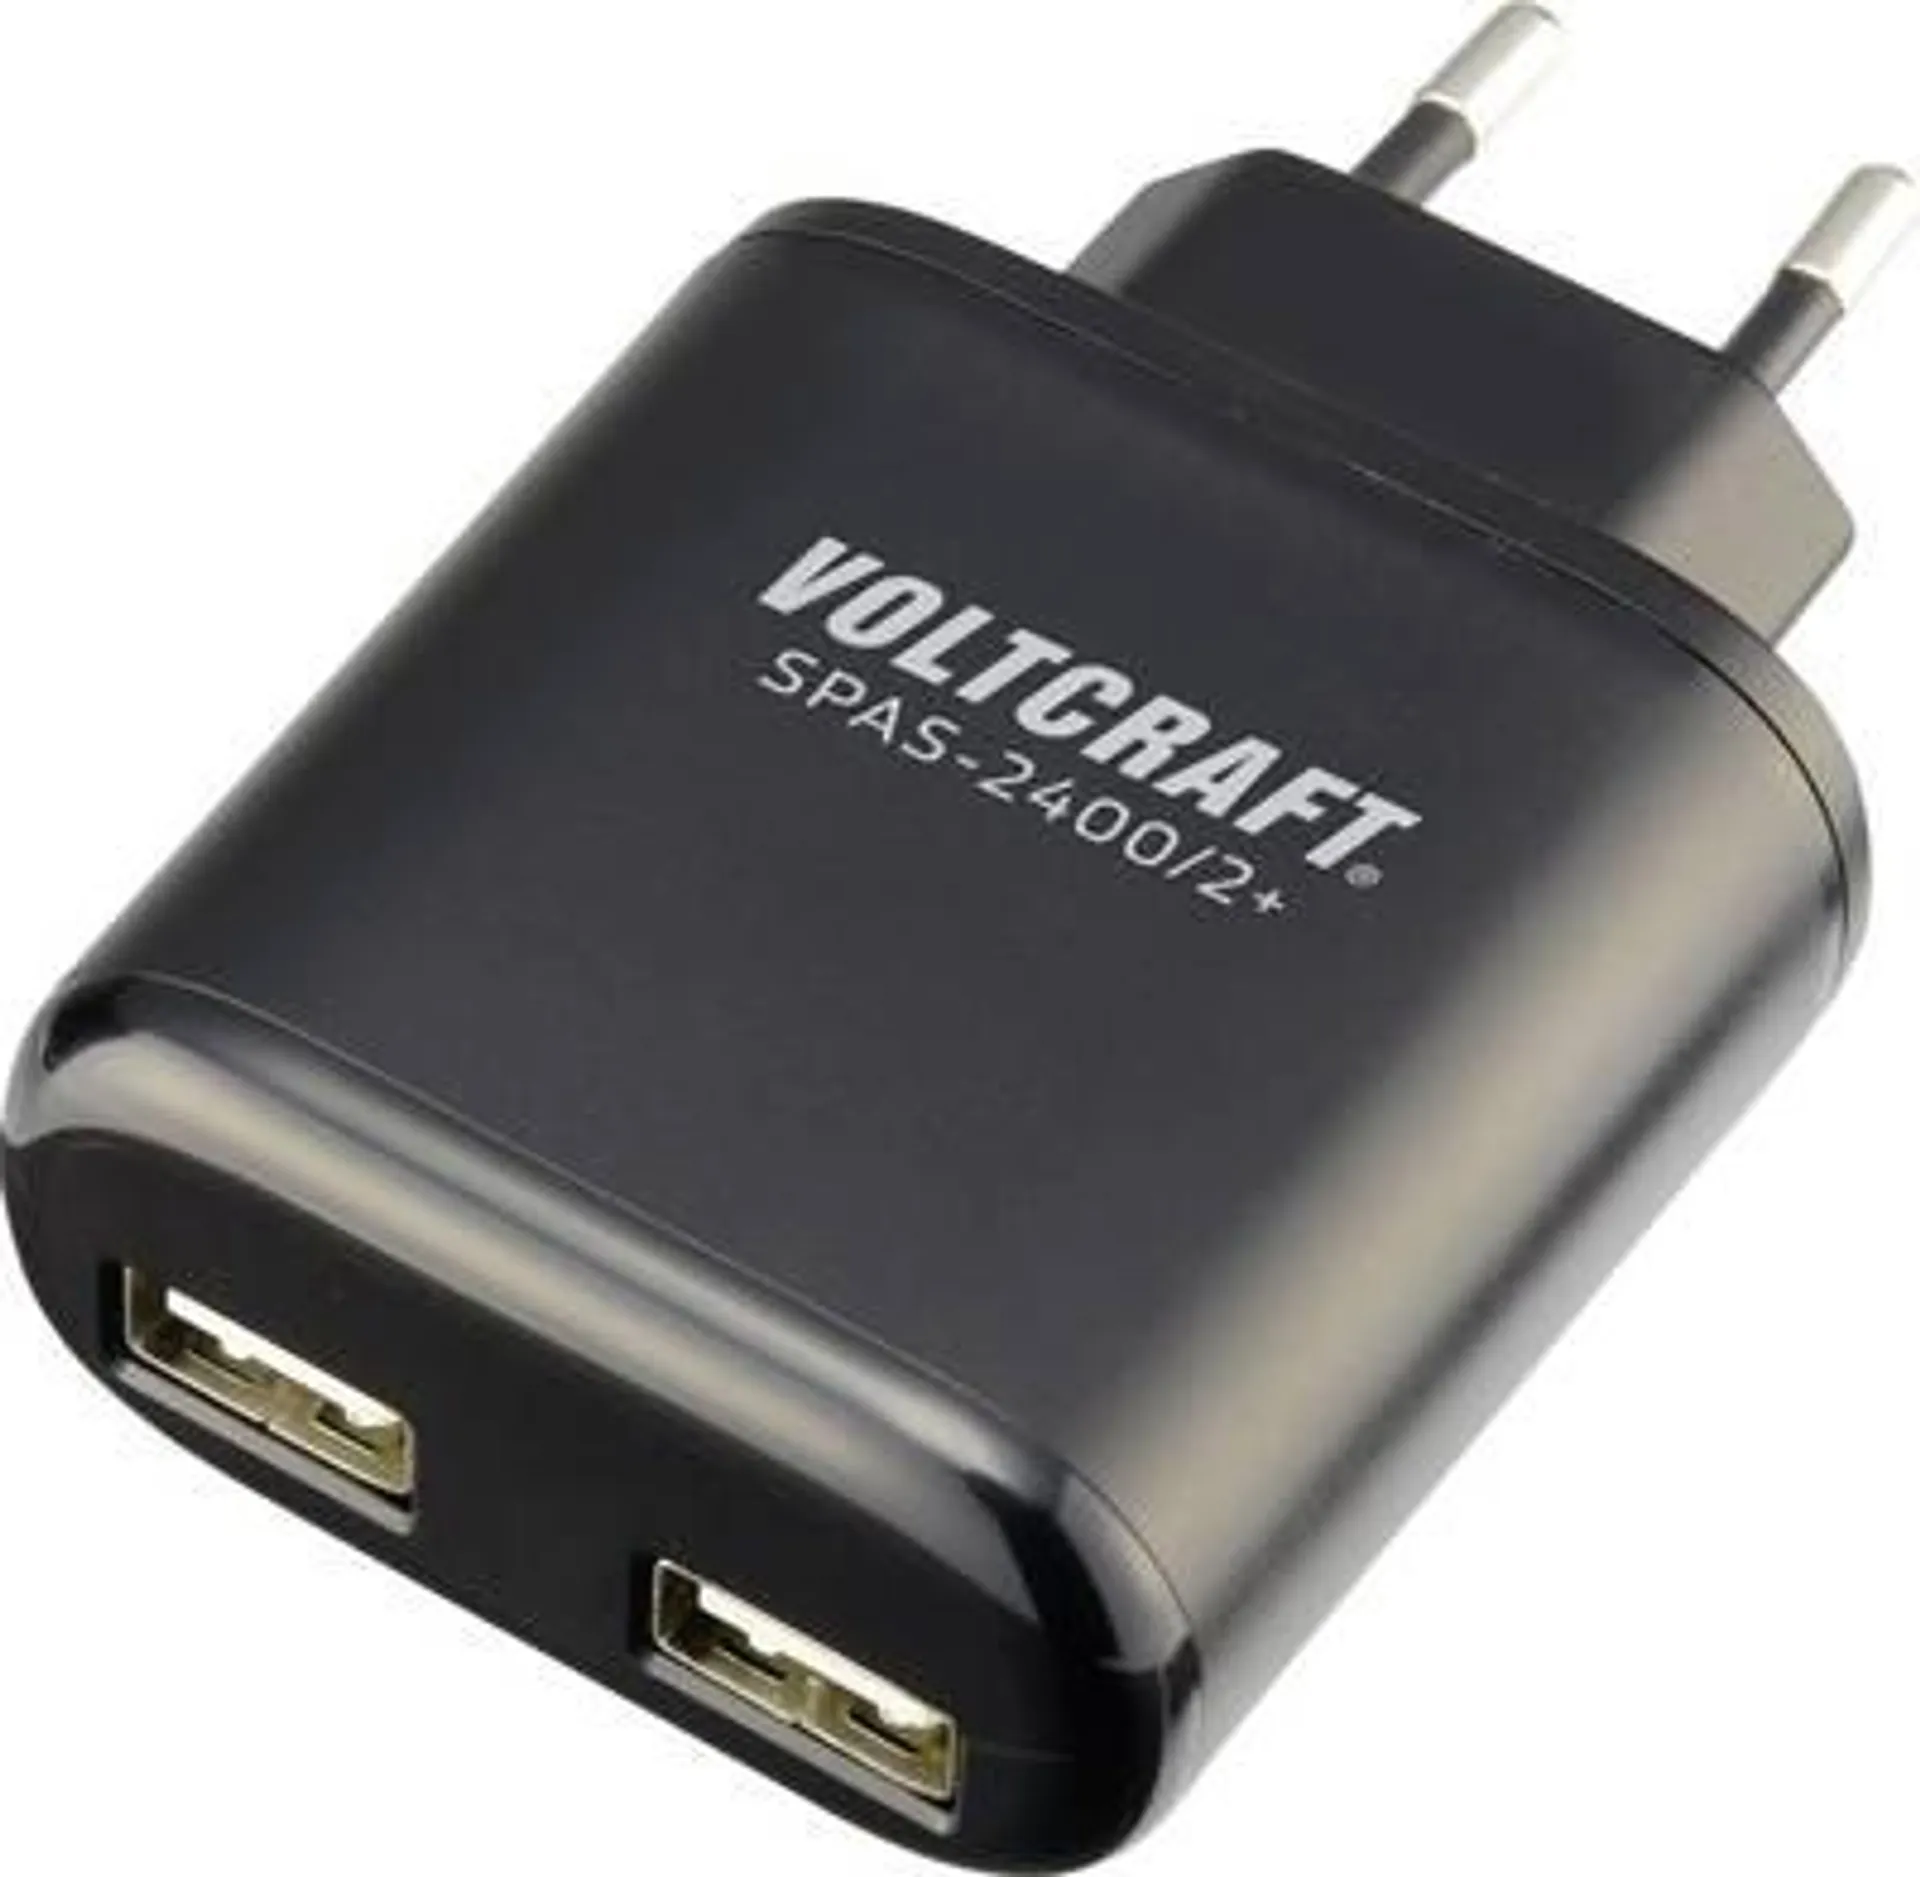 VOLTCRAFT SPAS-2400/2+ VC-11332175 USB charger Mains socket Max. output current 4800 mA 2 x USB